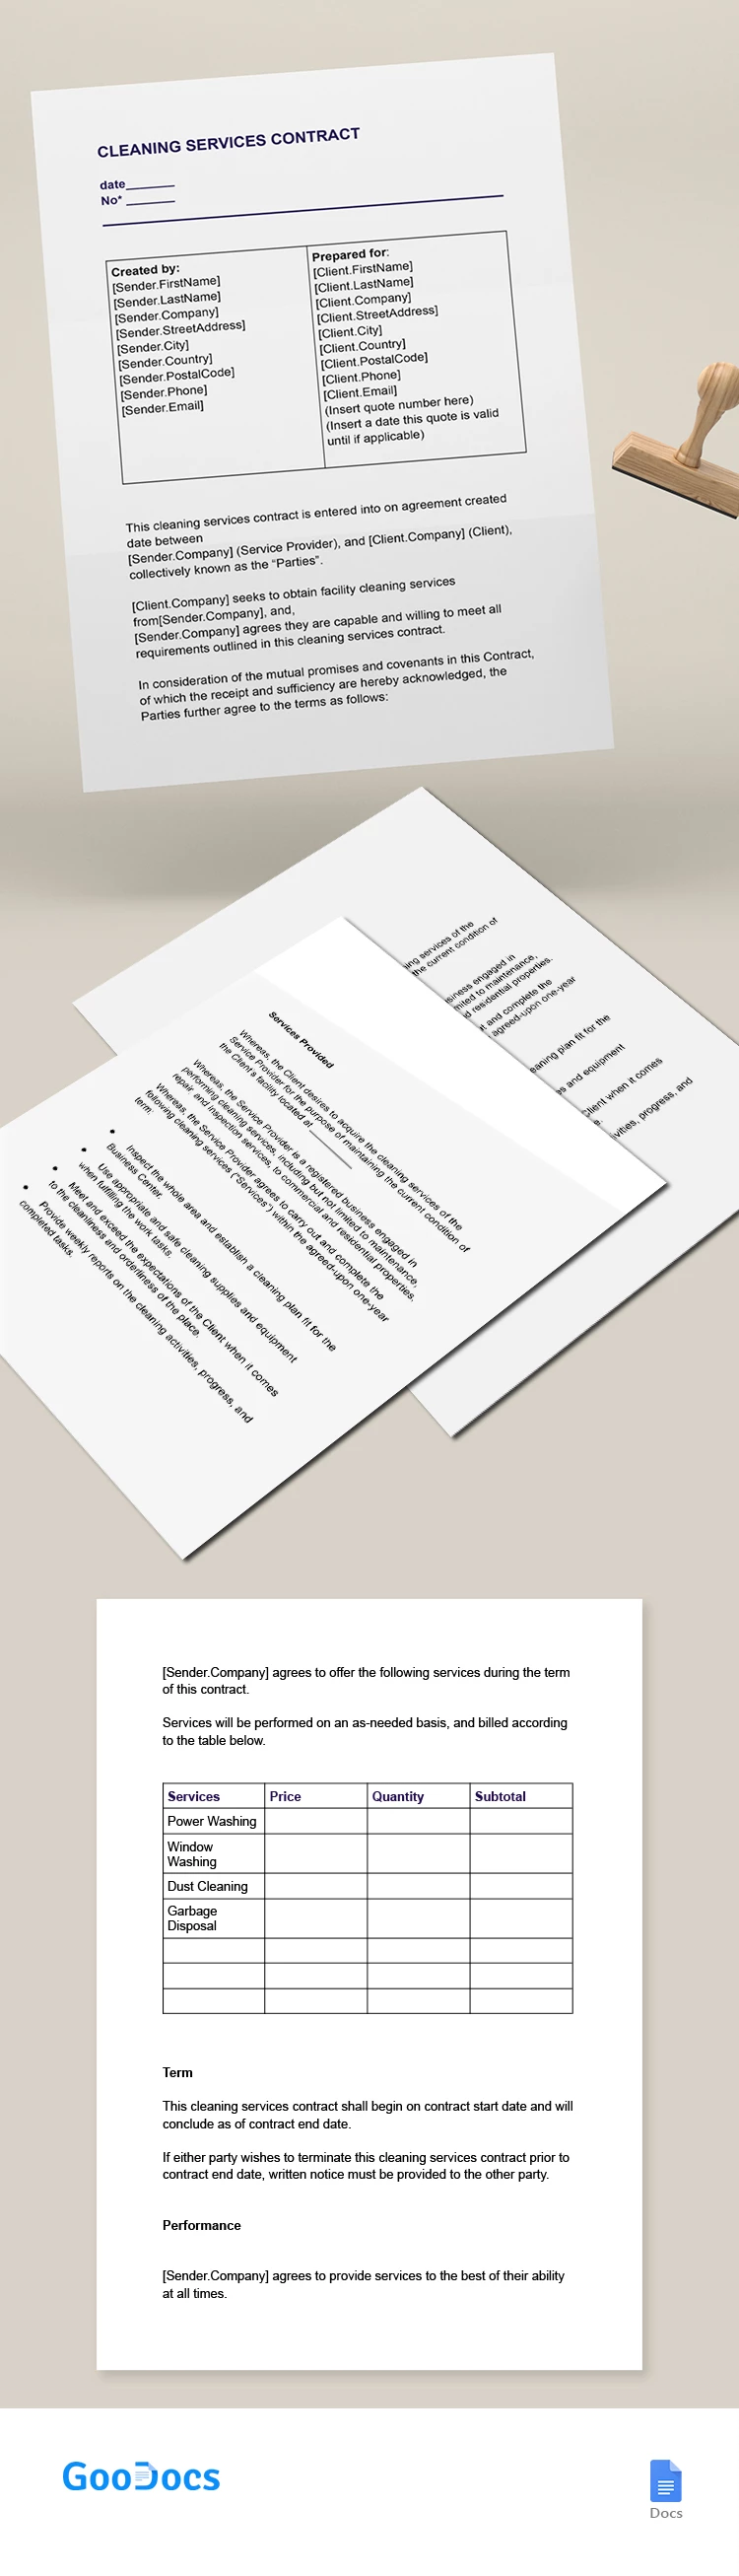 Cleaning Service Contract - free Google Docs Template - 10065547